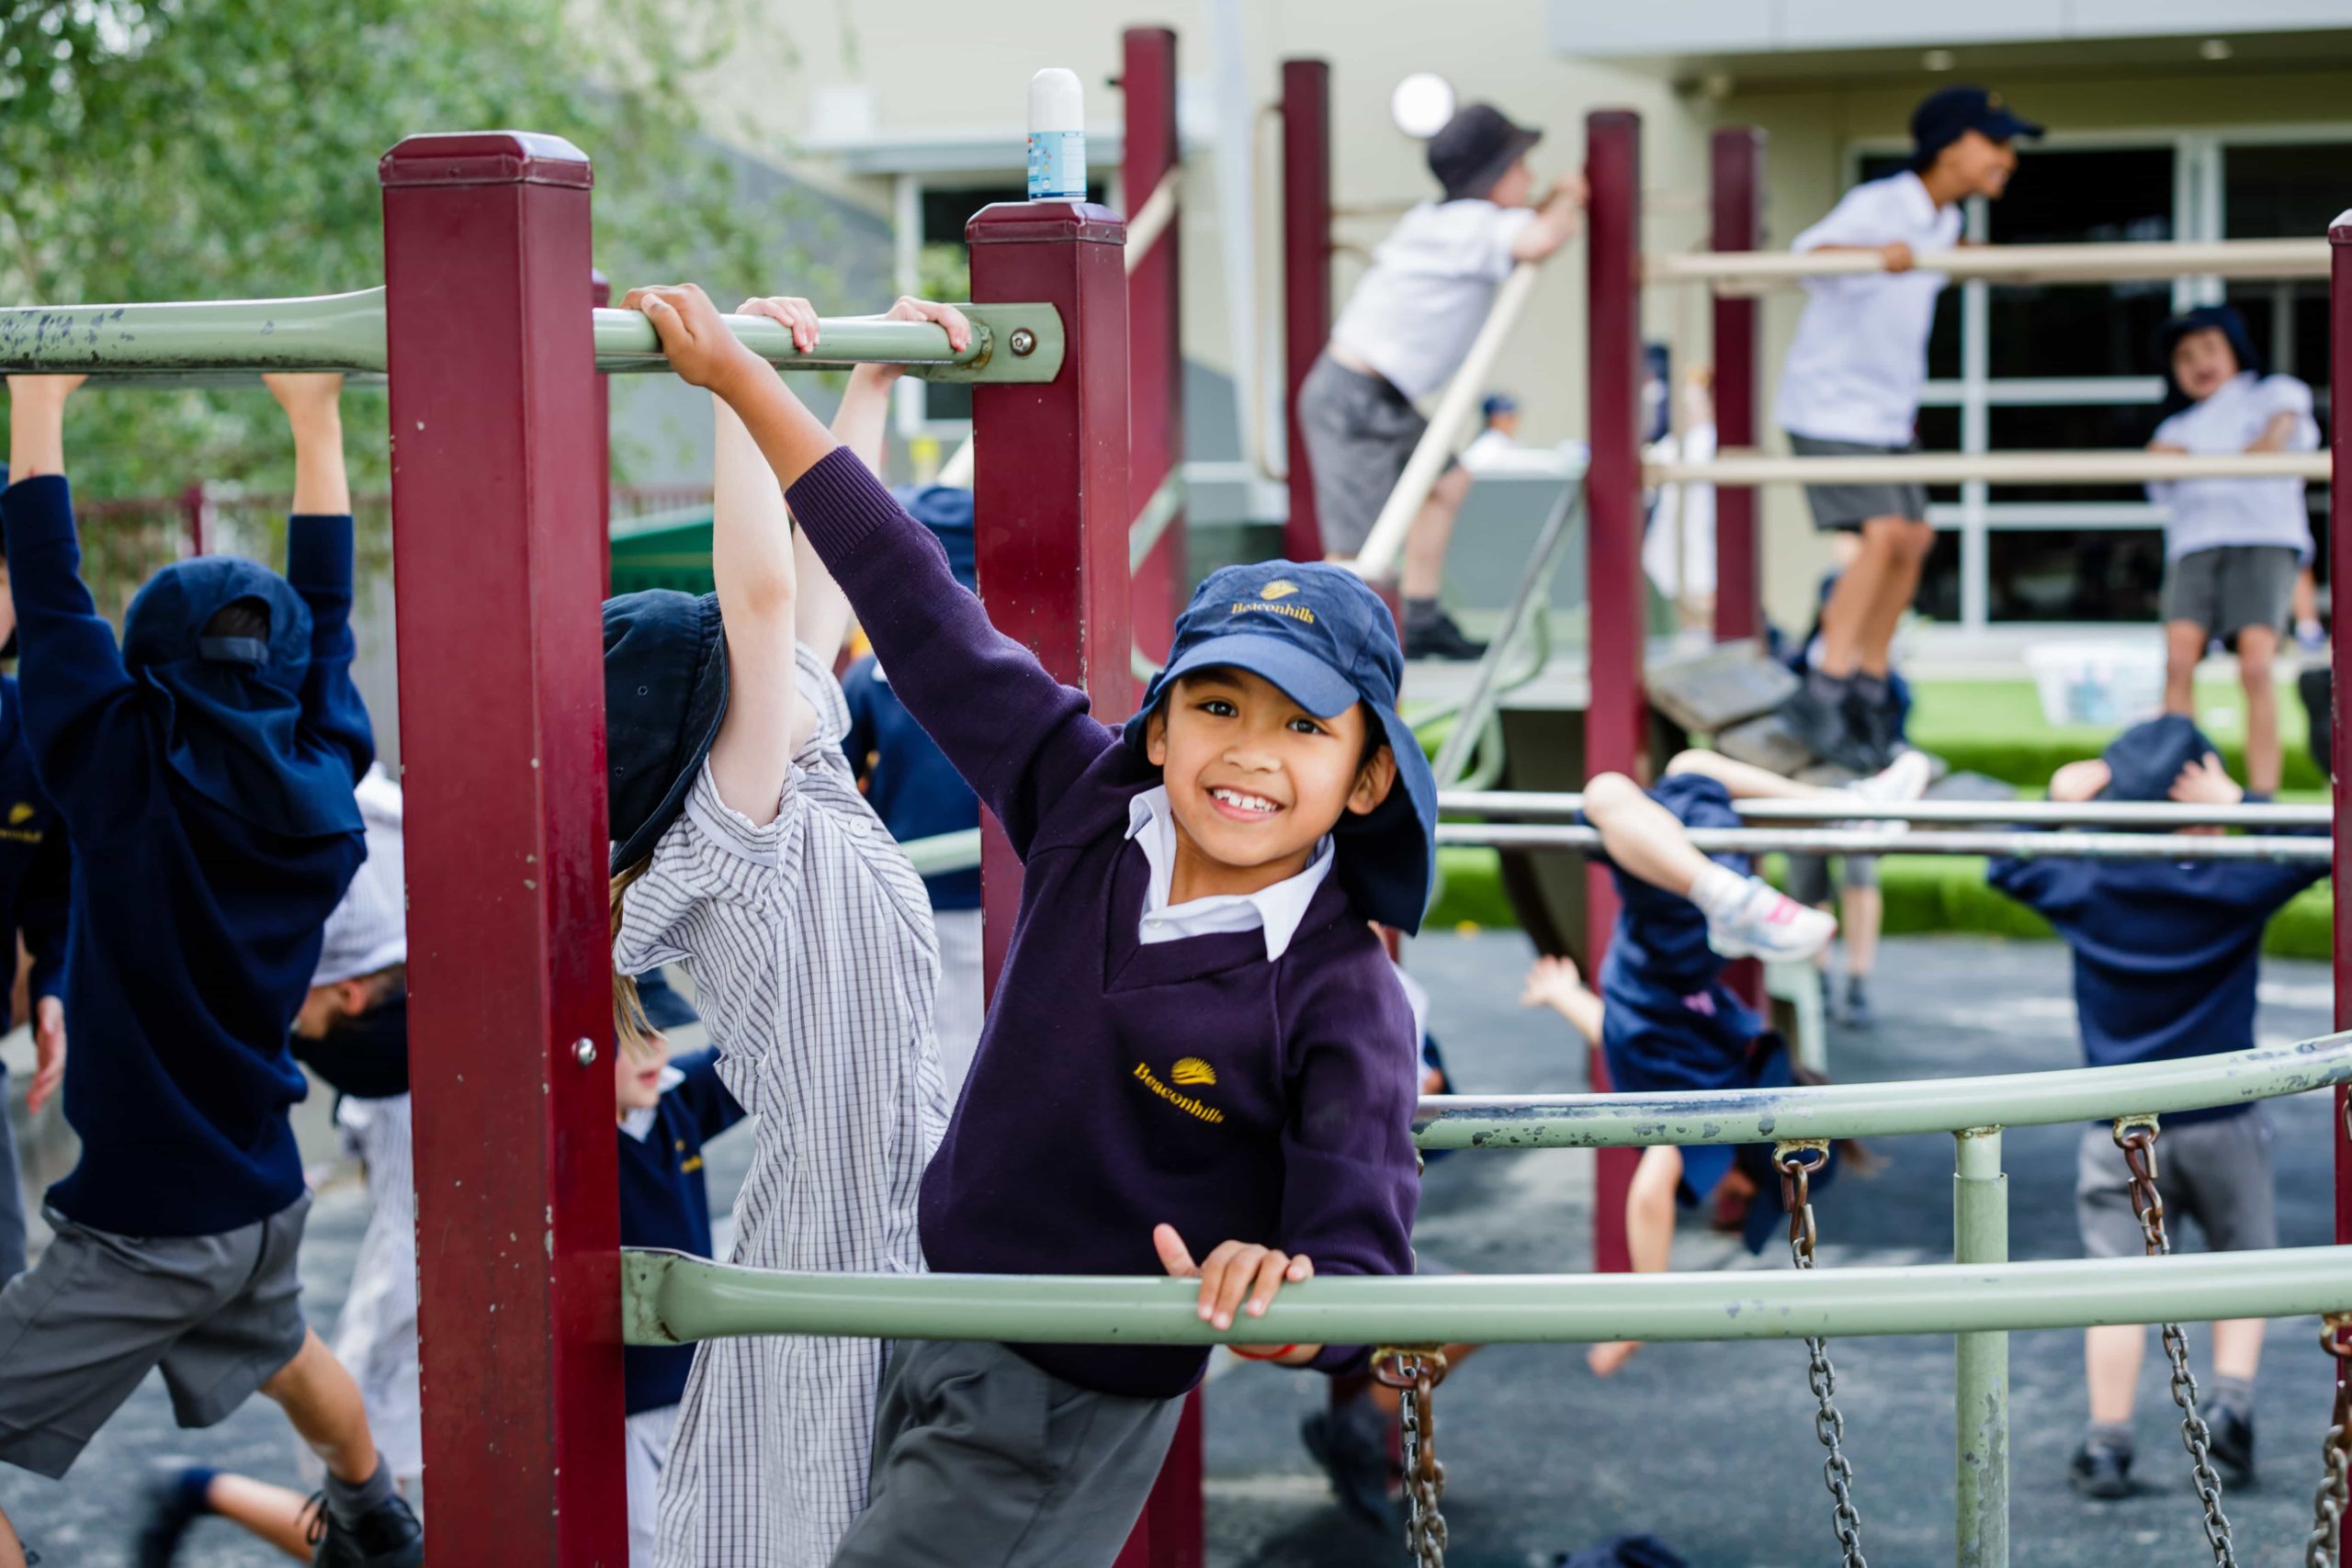 Beaconhills students playing in the playground